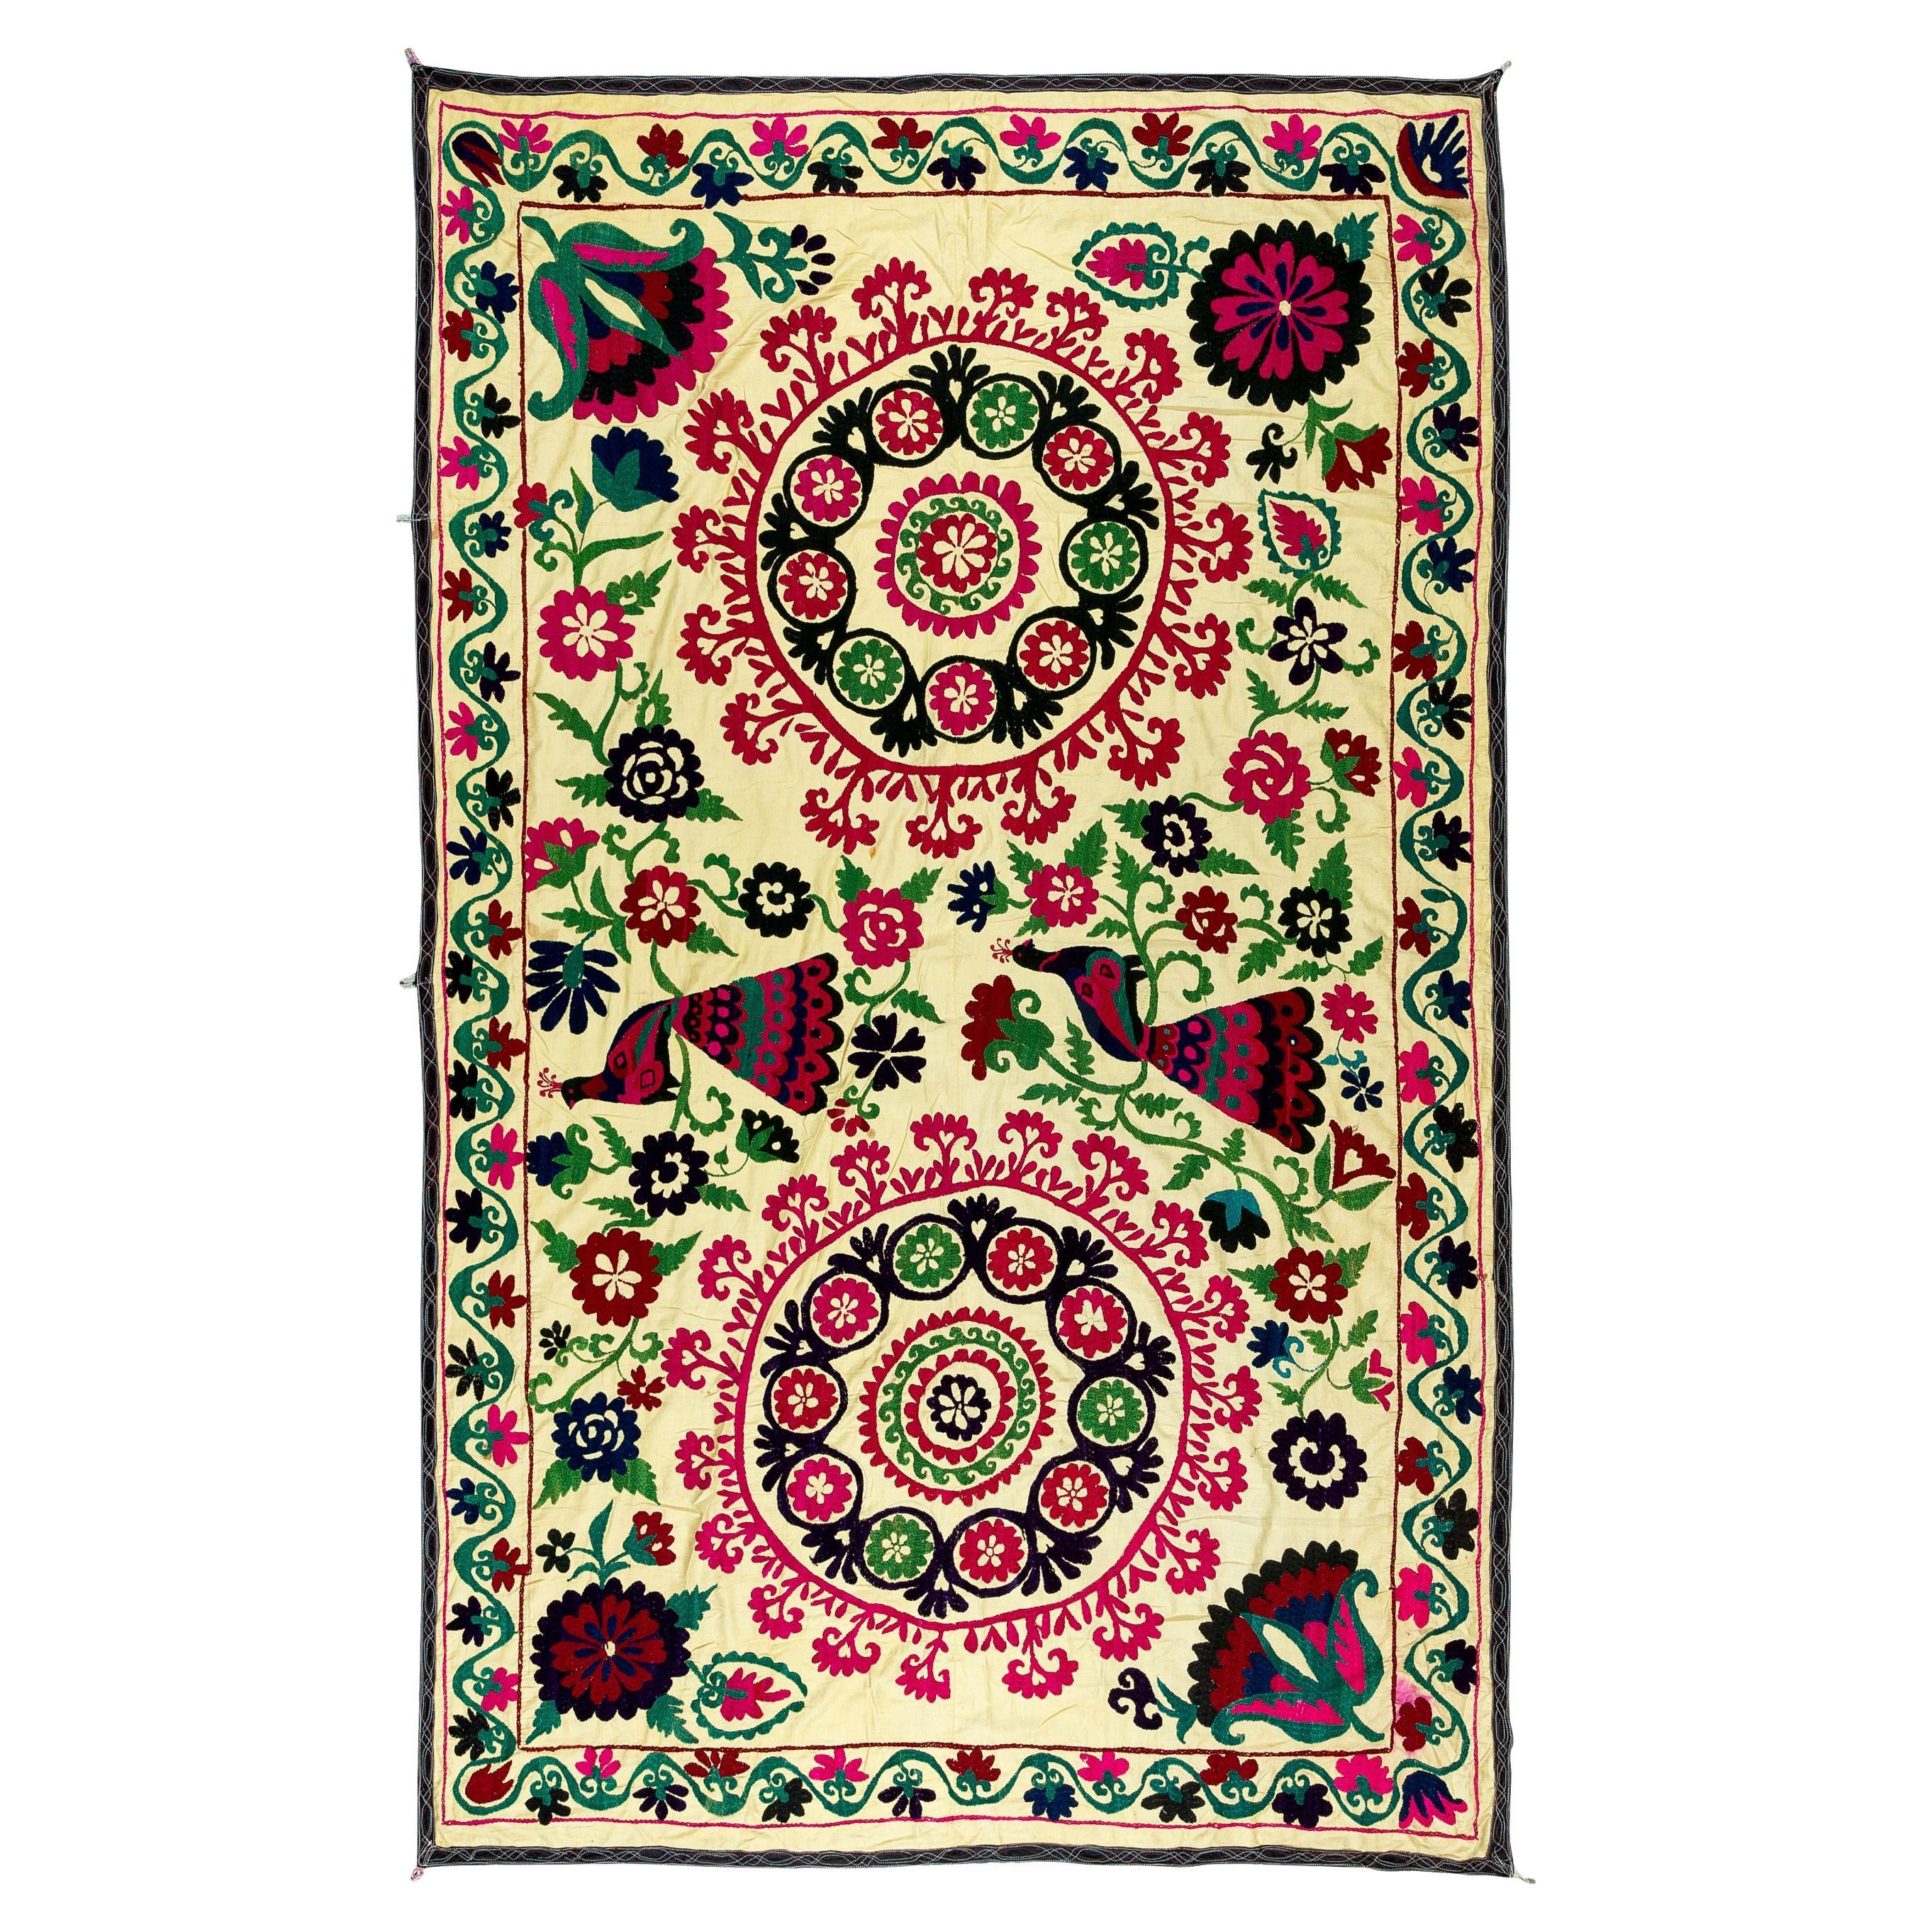 4.7x7.4 Ft Uzbek Silk Hand Embroidery Suzani Bed Cover, Vintage Wall Hanging